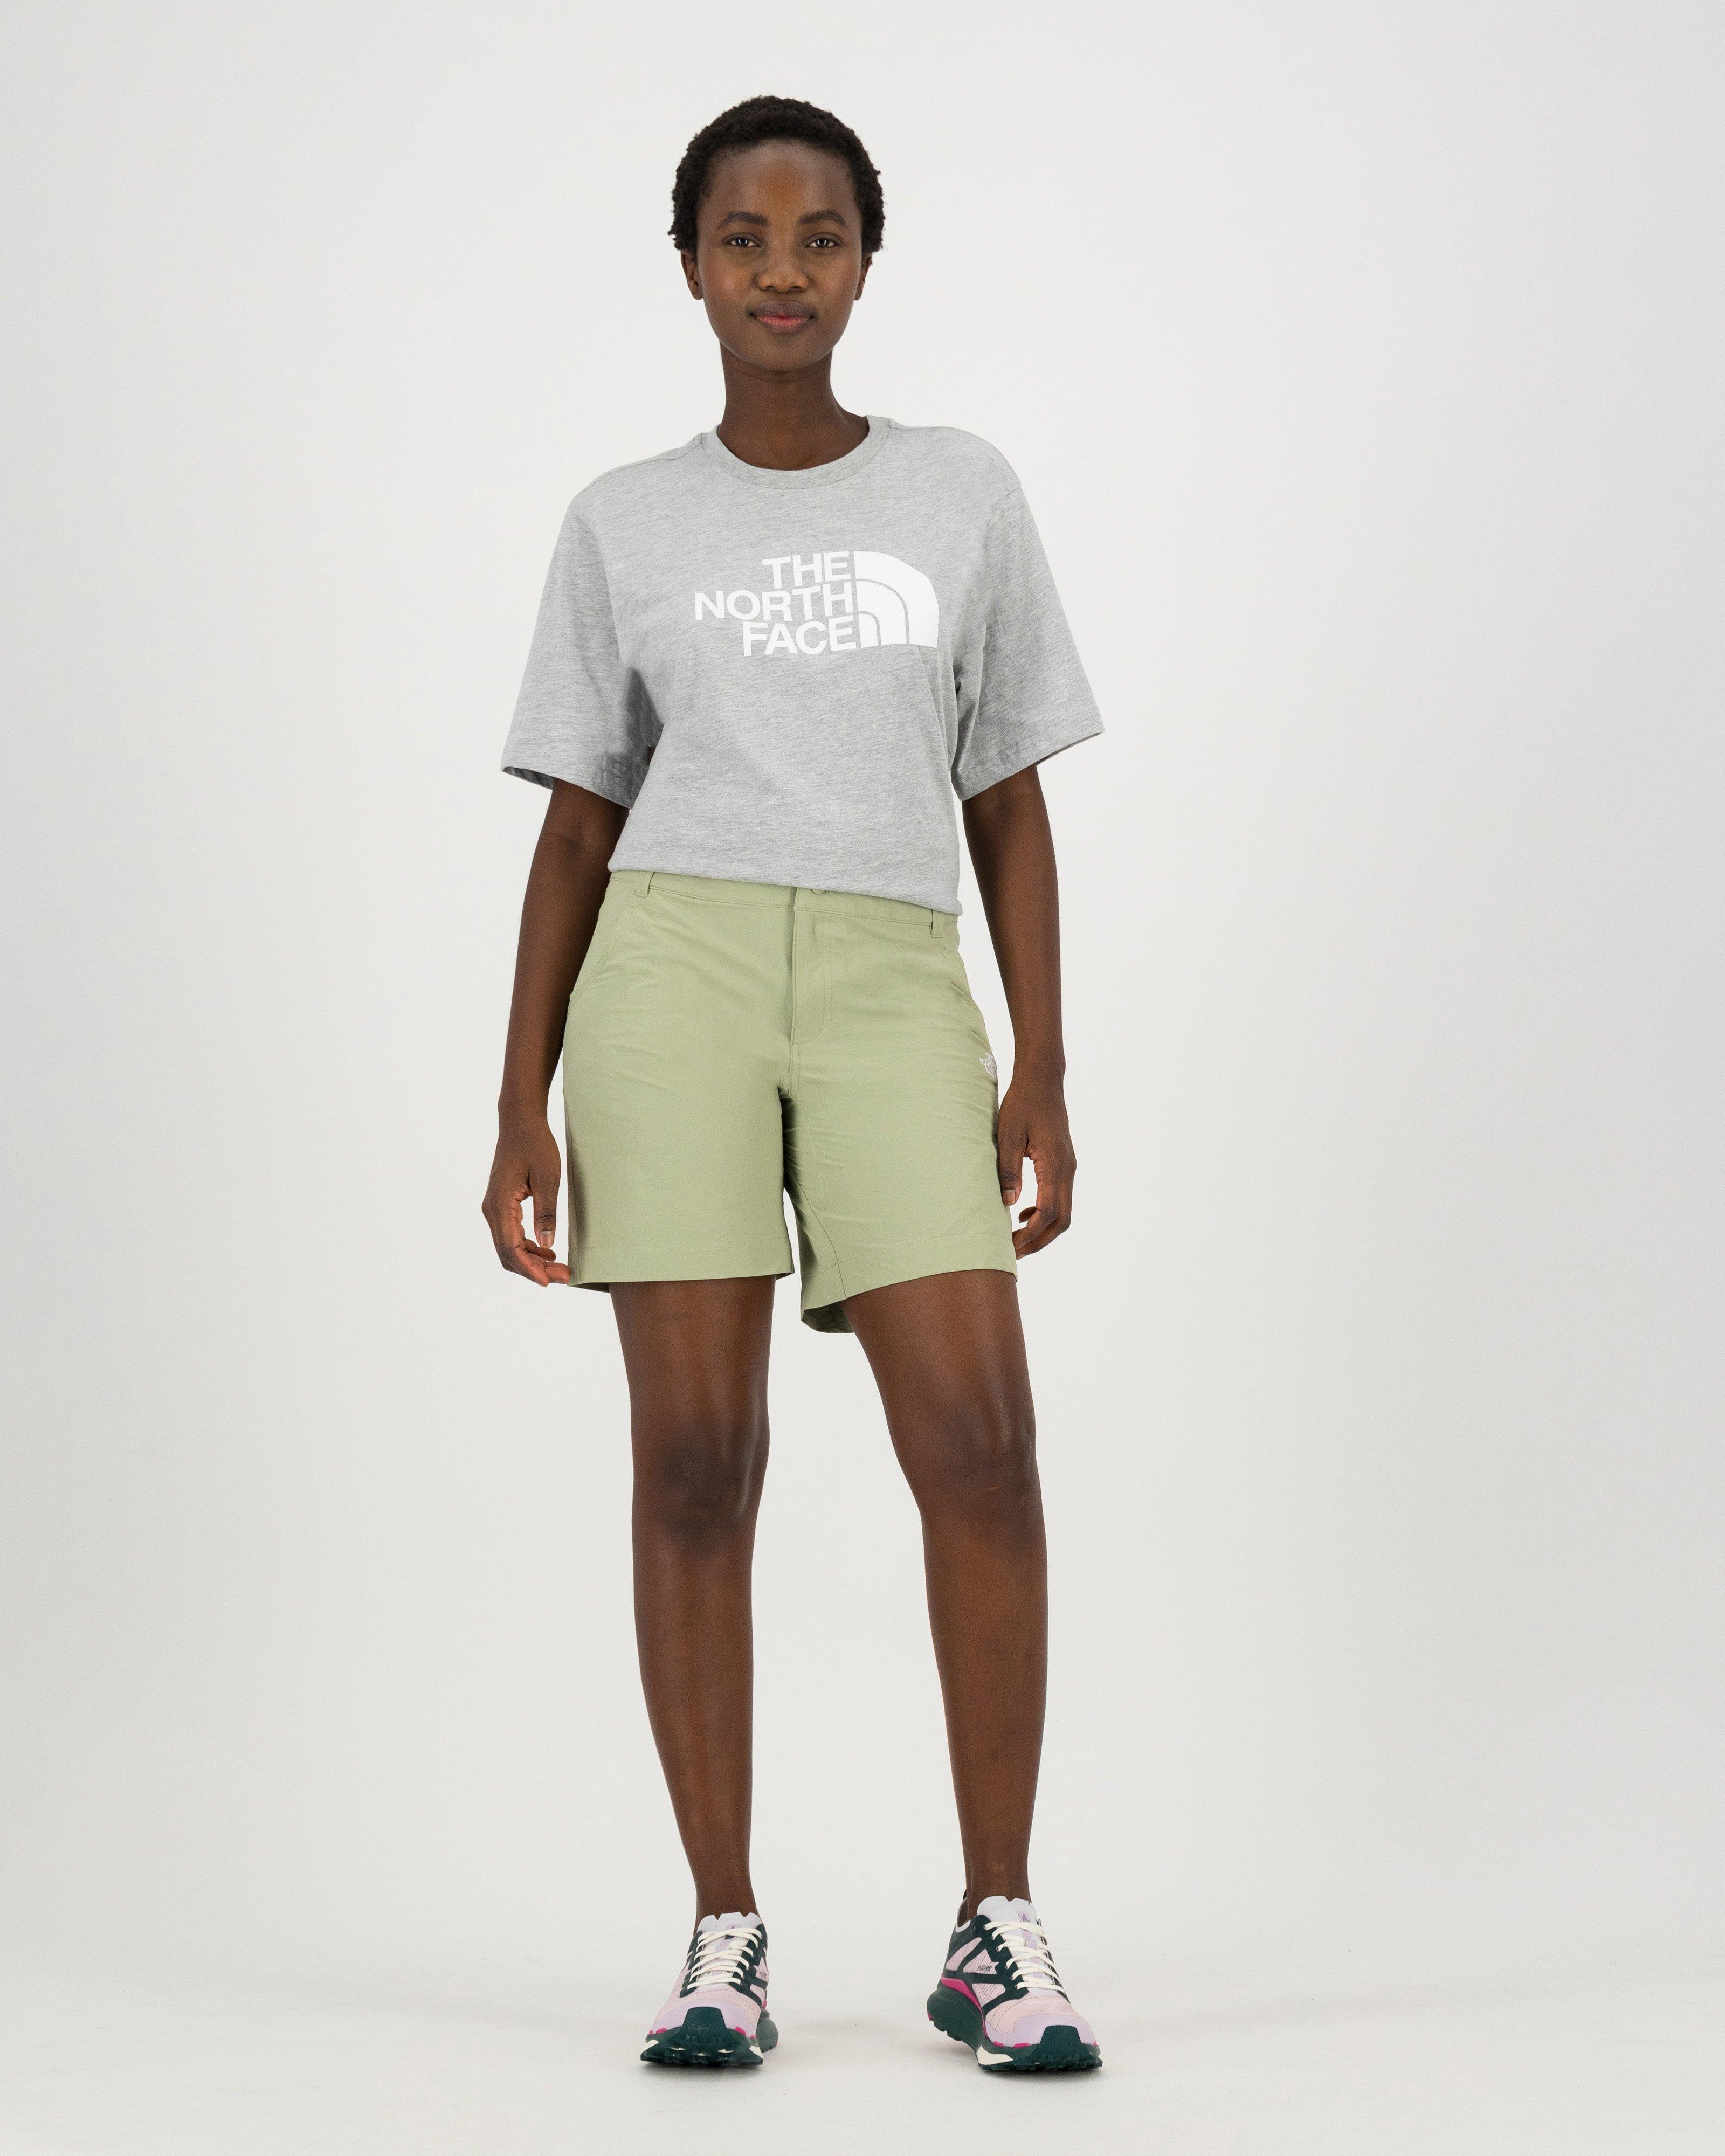 The North Face, Shorts